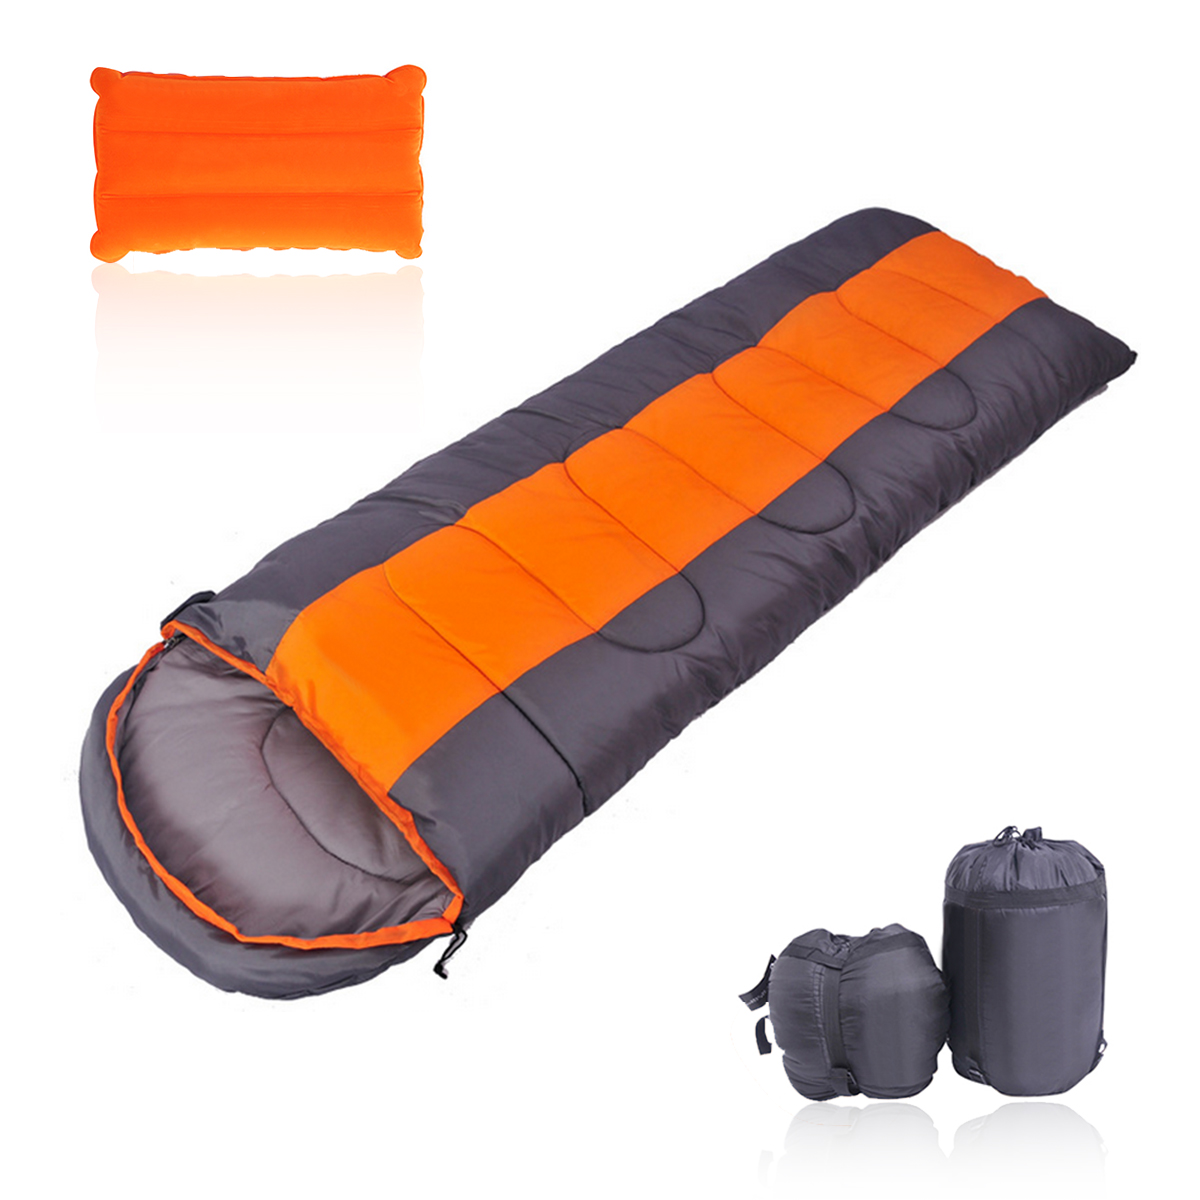 14KG-Thicken-210T-Waterproof-Sleeping-Bag-With-Pillow-Portable-Lightweight-Outdoor-Camping-Hiking-Sl-1781176-3